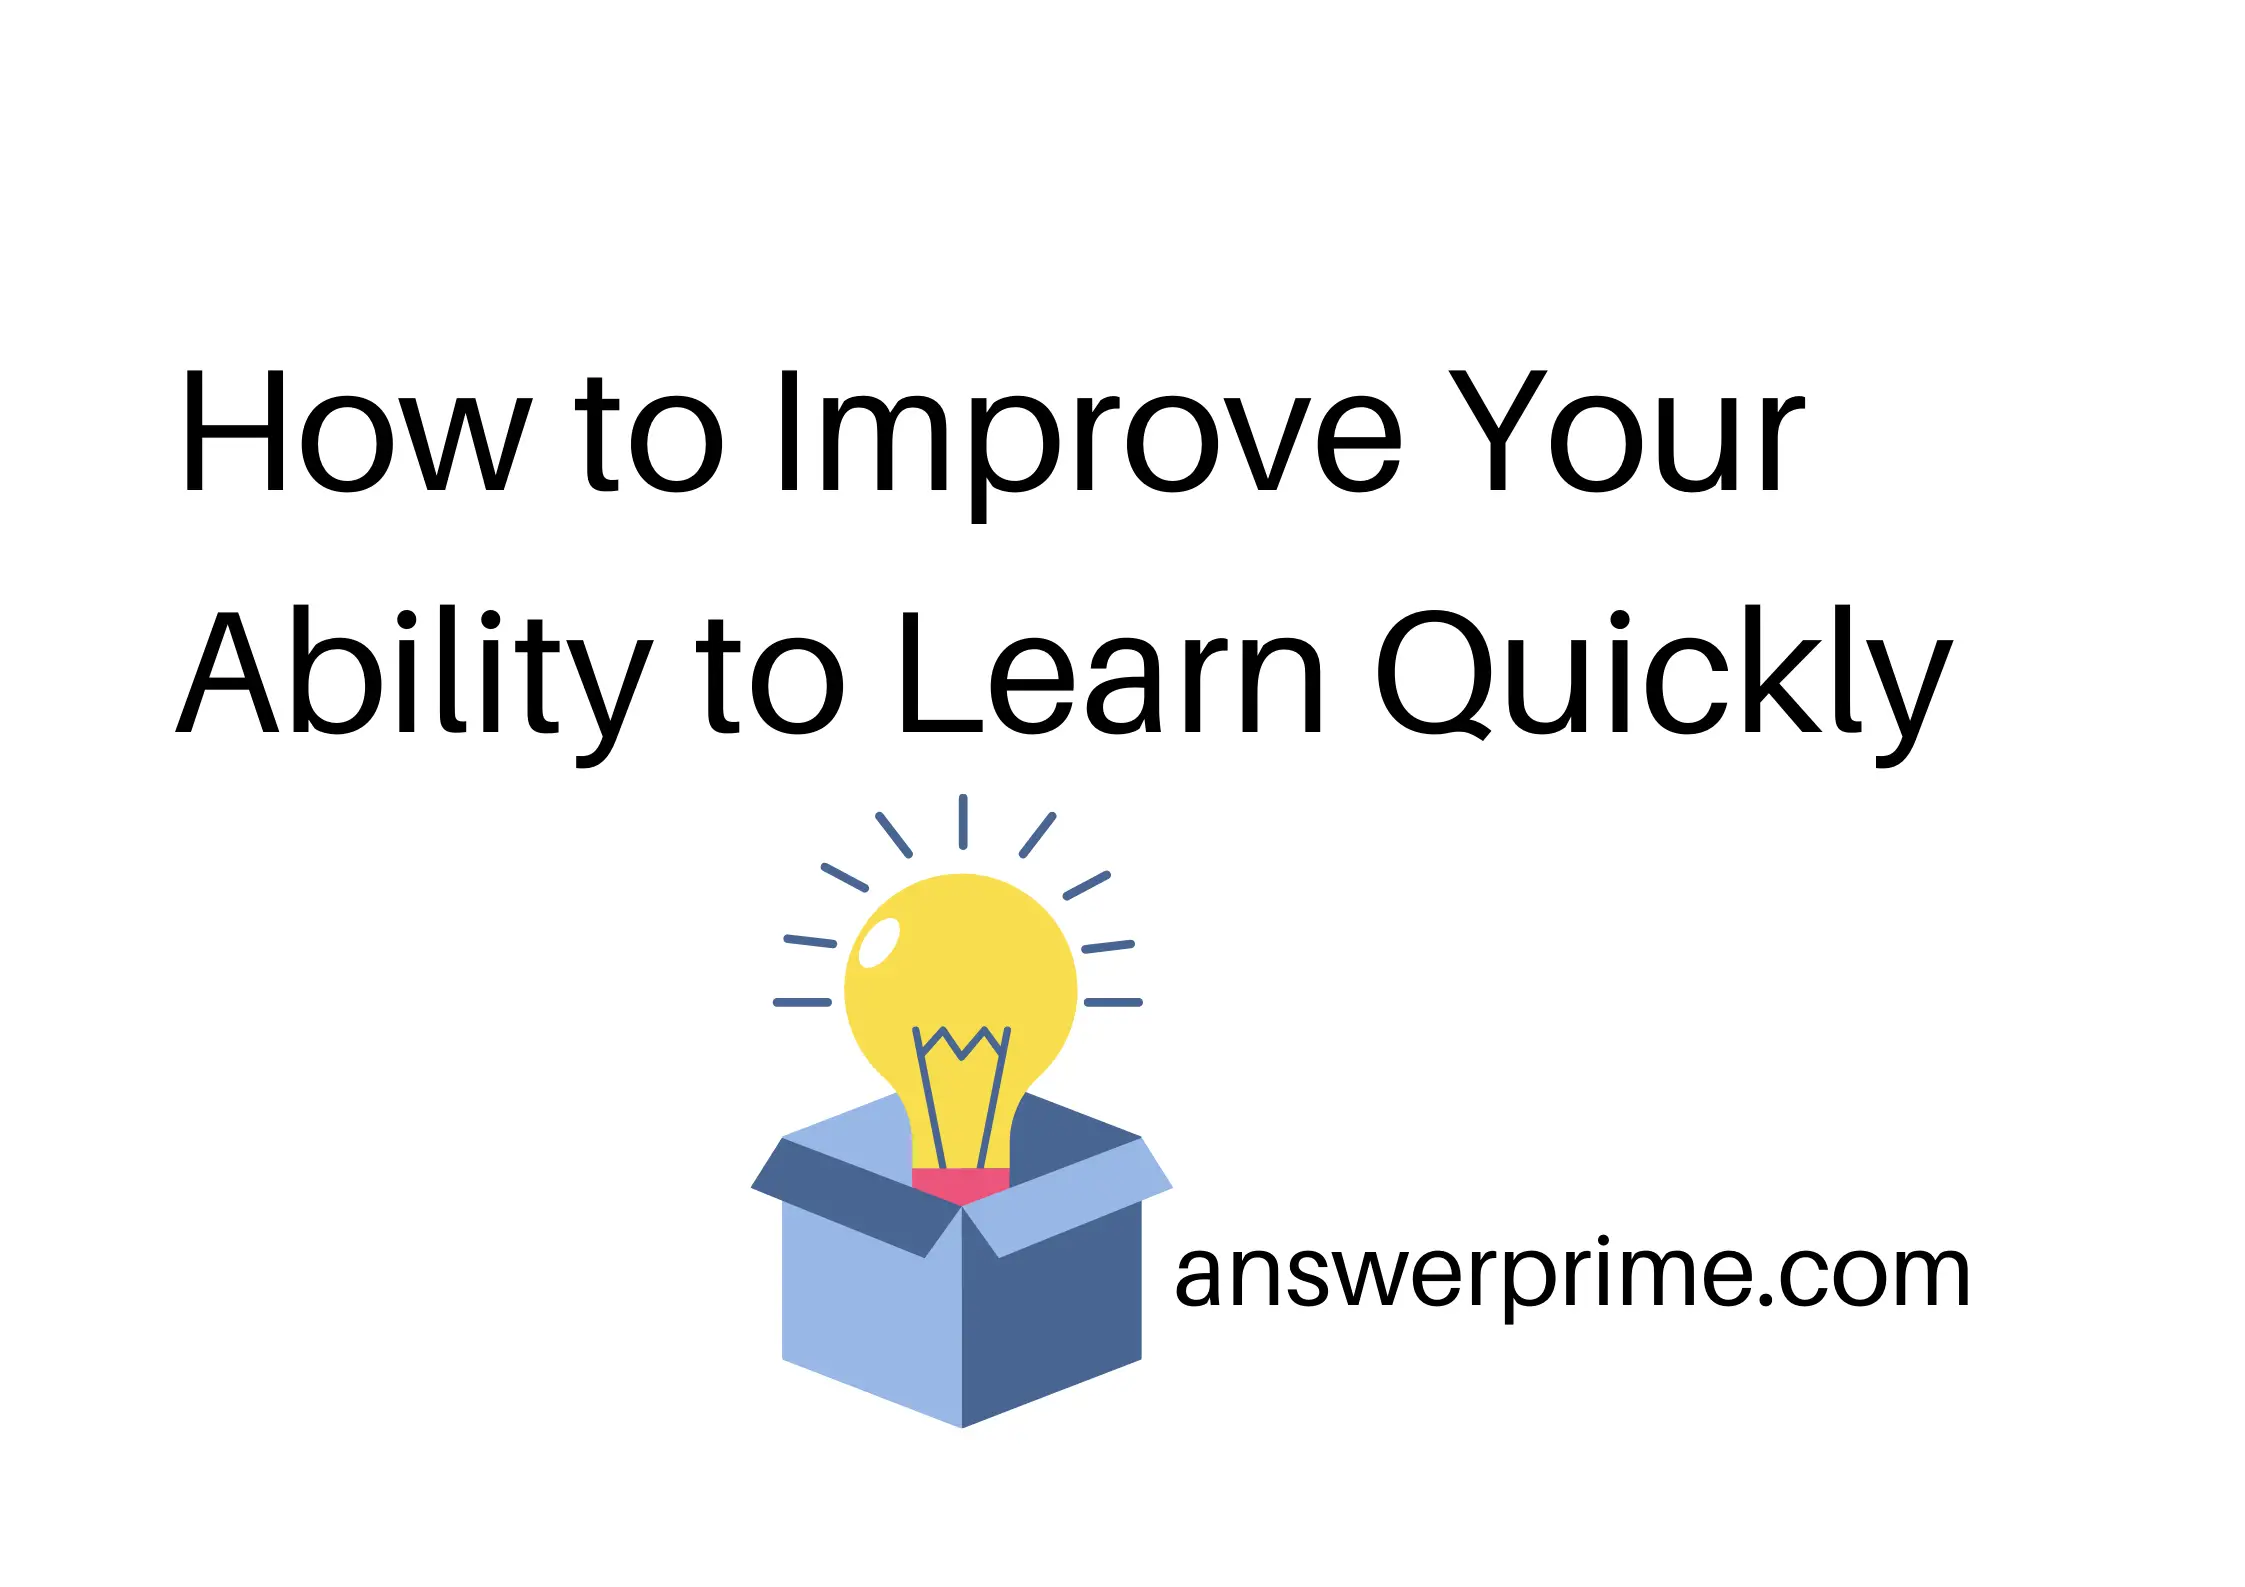 How to Improve Your Ability to Learn Quickly